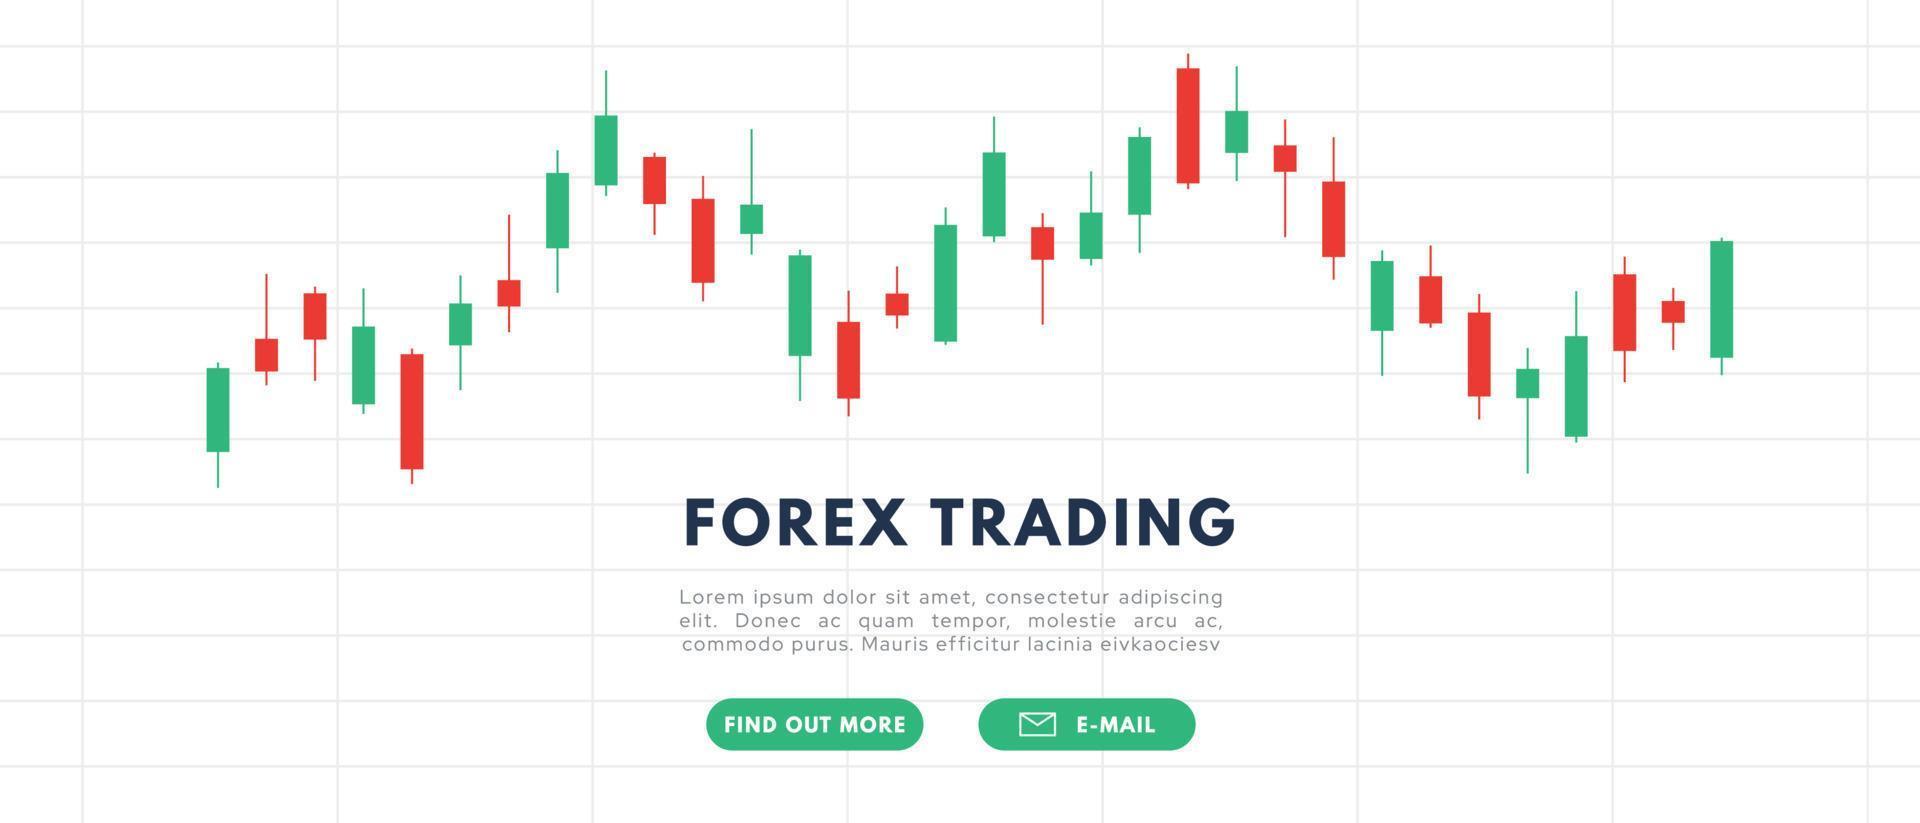 Forex Trading banner. Stock market candlestick, chart green and red japanese candle stick. Chart of buy and sell indicators vector illustration